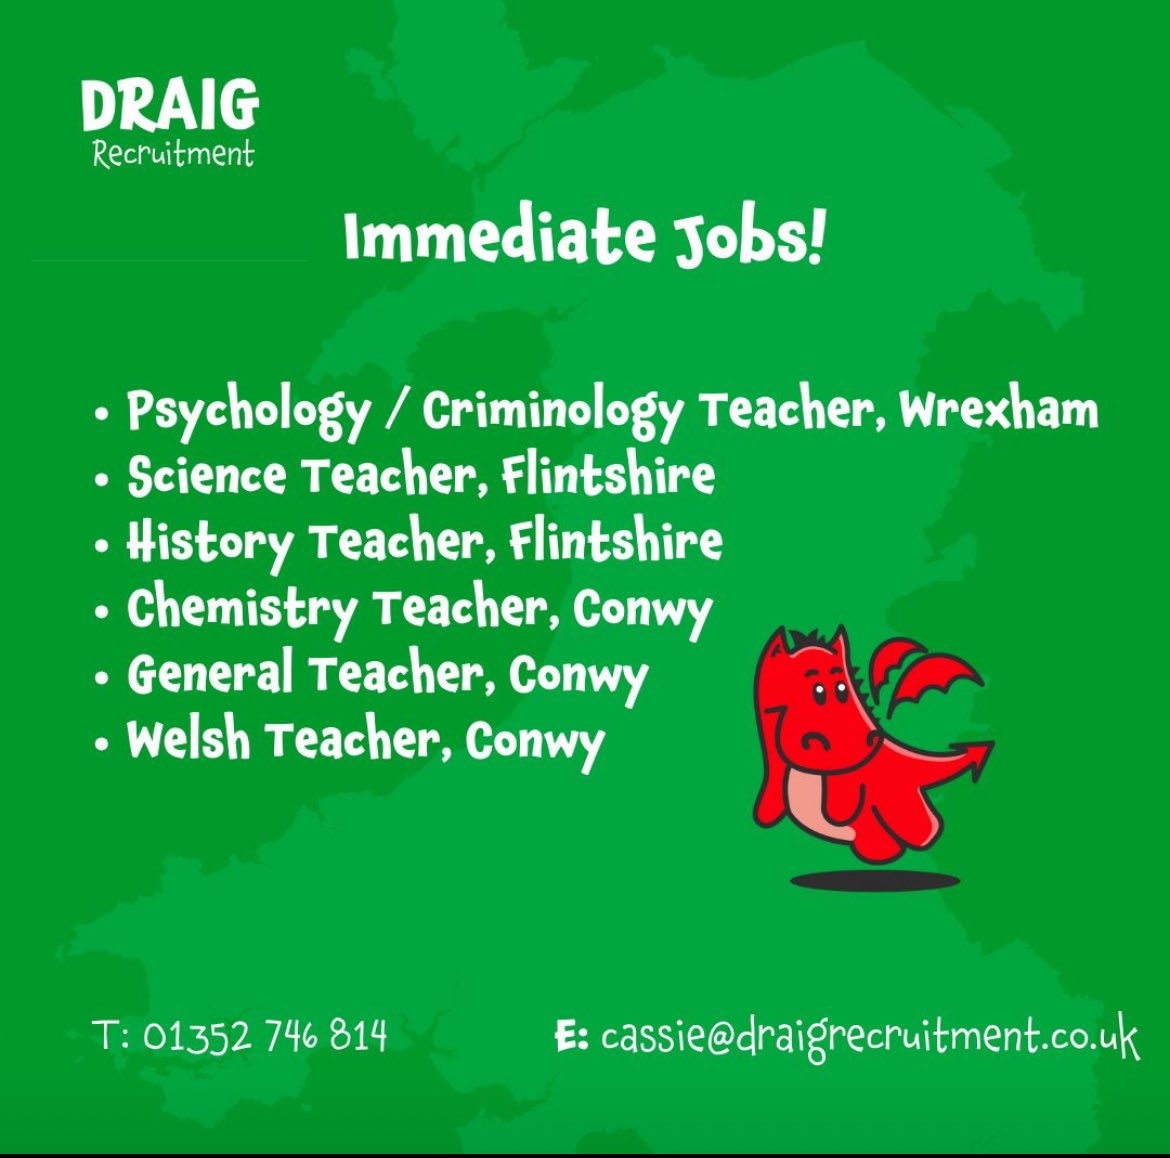 We currently have a variety of full time, long-term teacher roles available if you are a teacher or know of any teachers looking for work. 
#northwalessocial #northwalesjobs